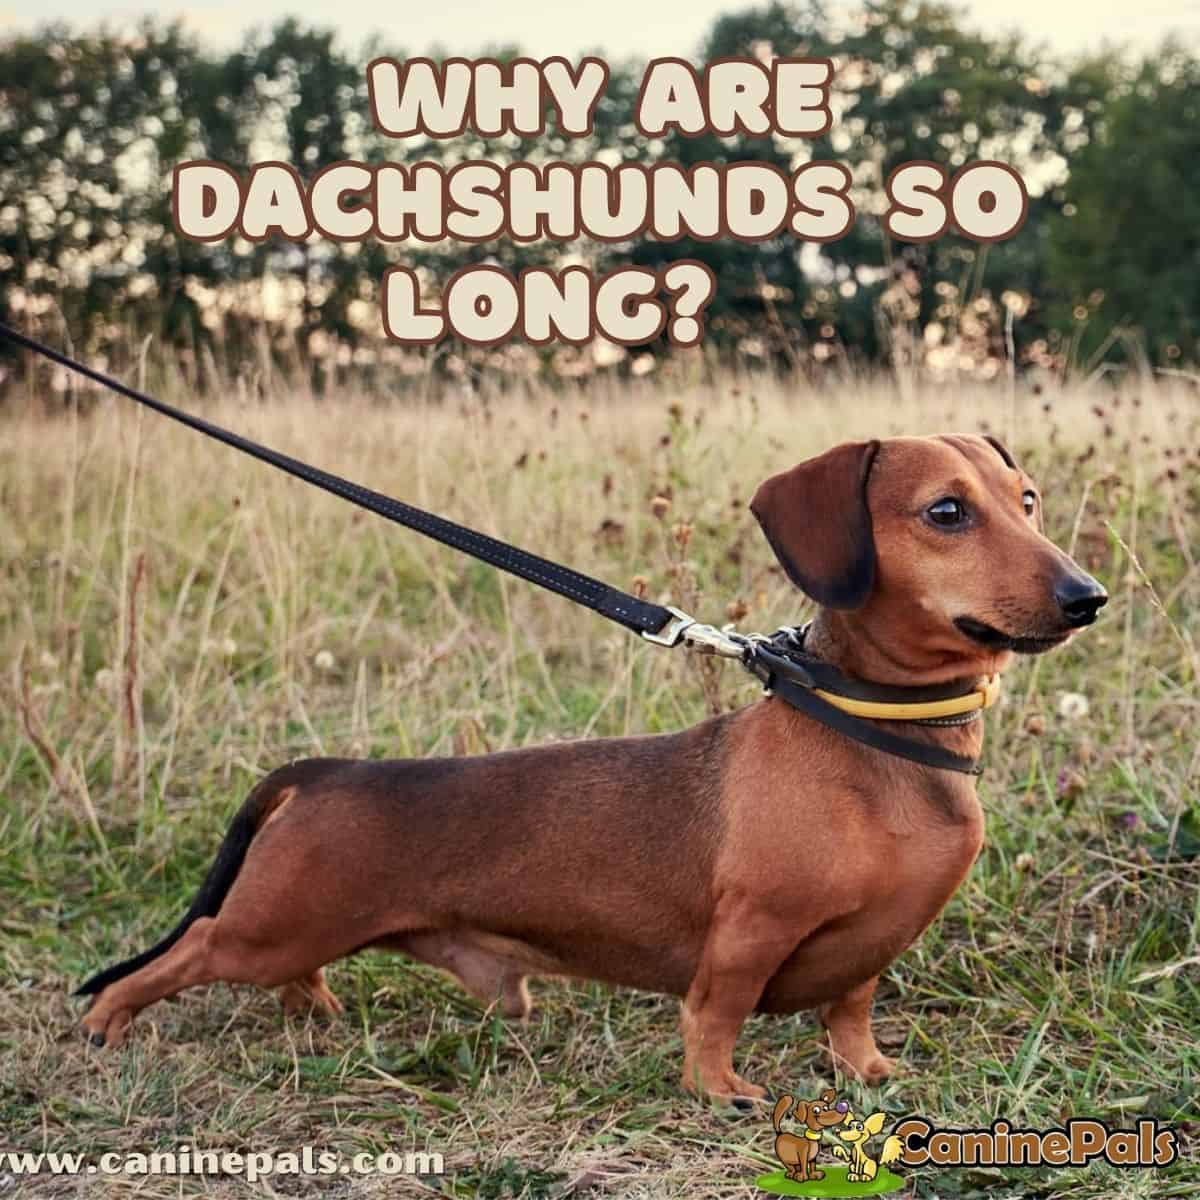 Why Are Dachshunds So Long?